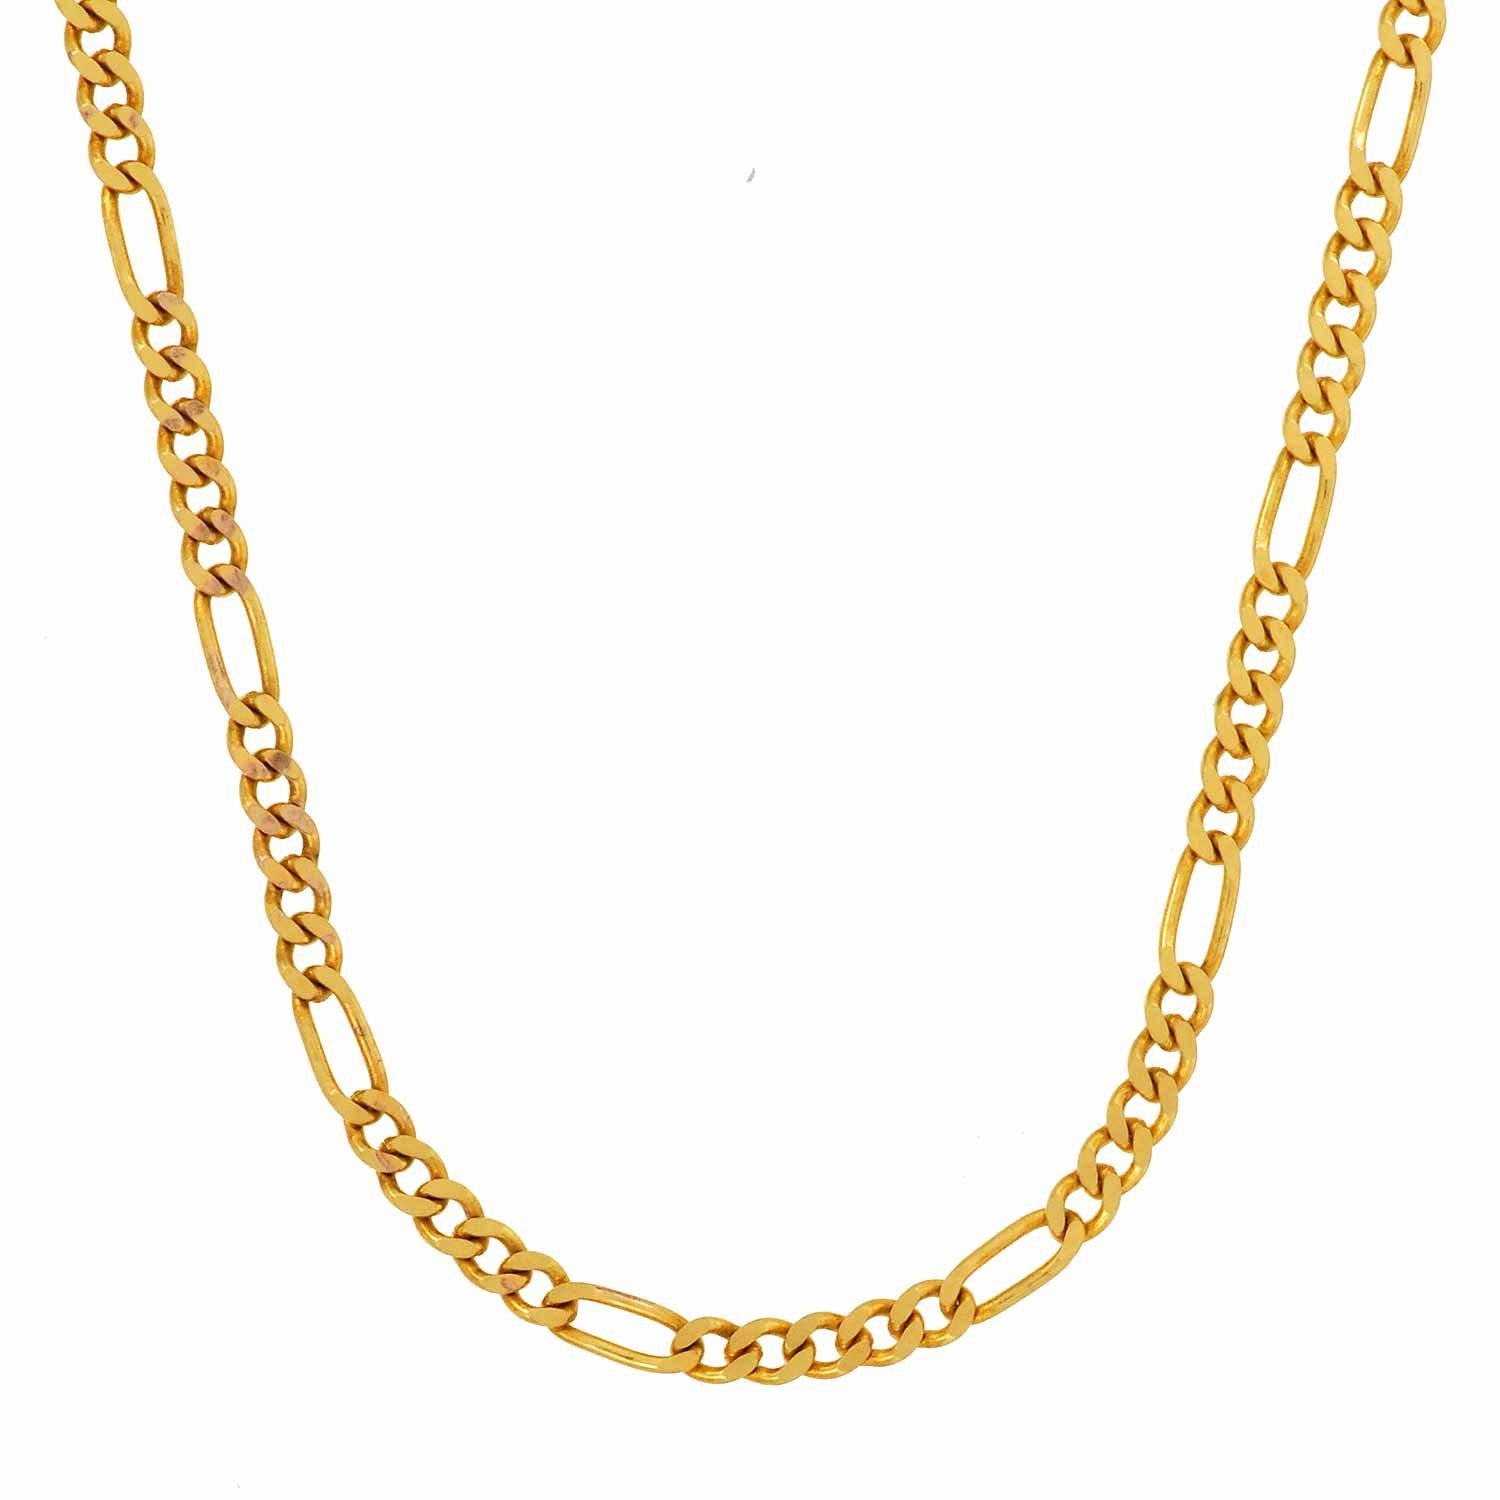 HOPLO Goldkette, in Germany Made